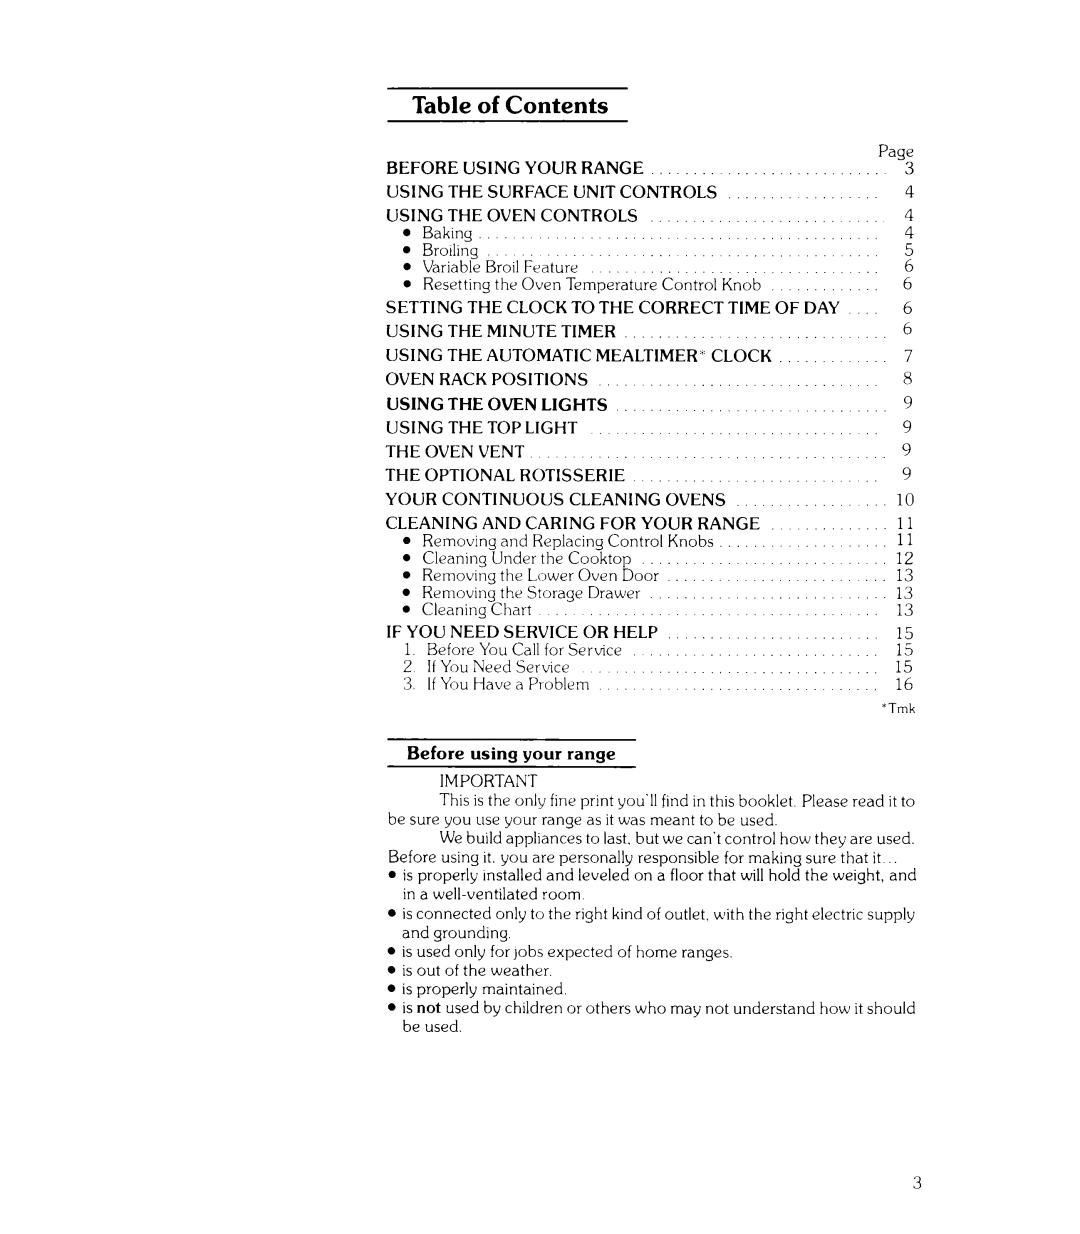 Whirlpool RJE-953PP manual of Contents 